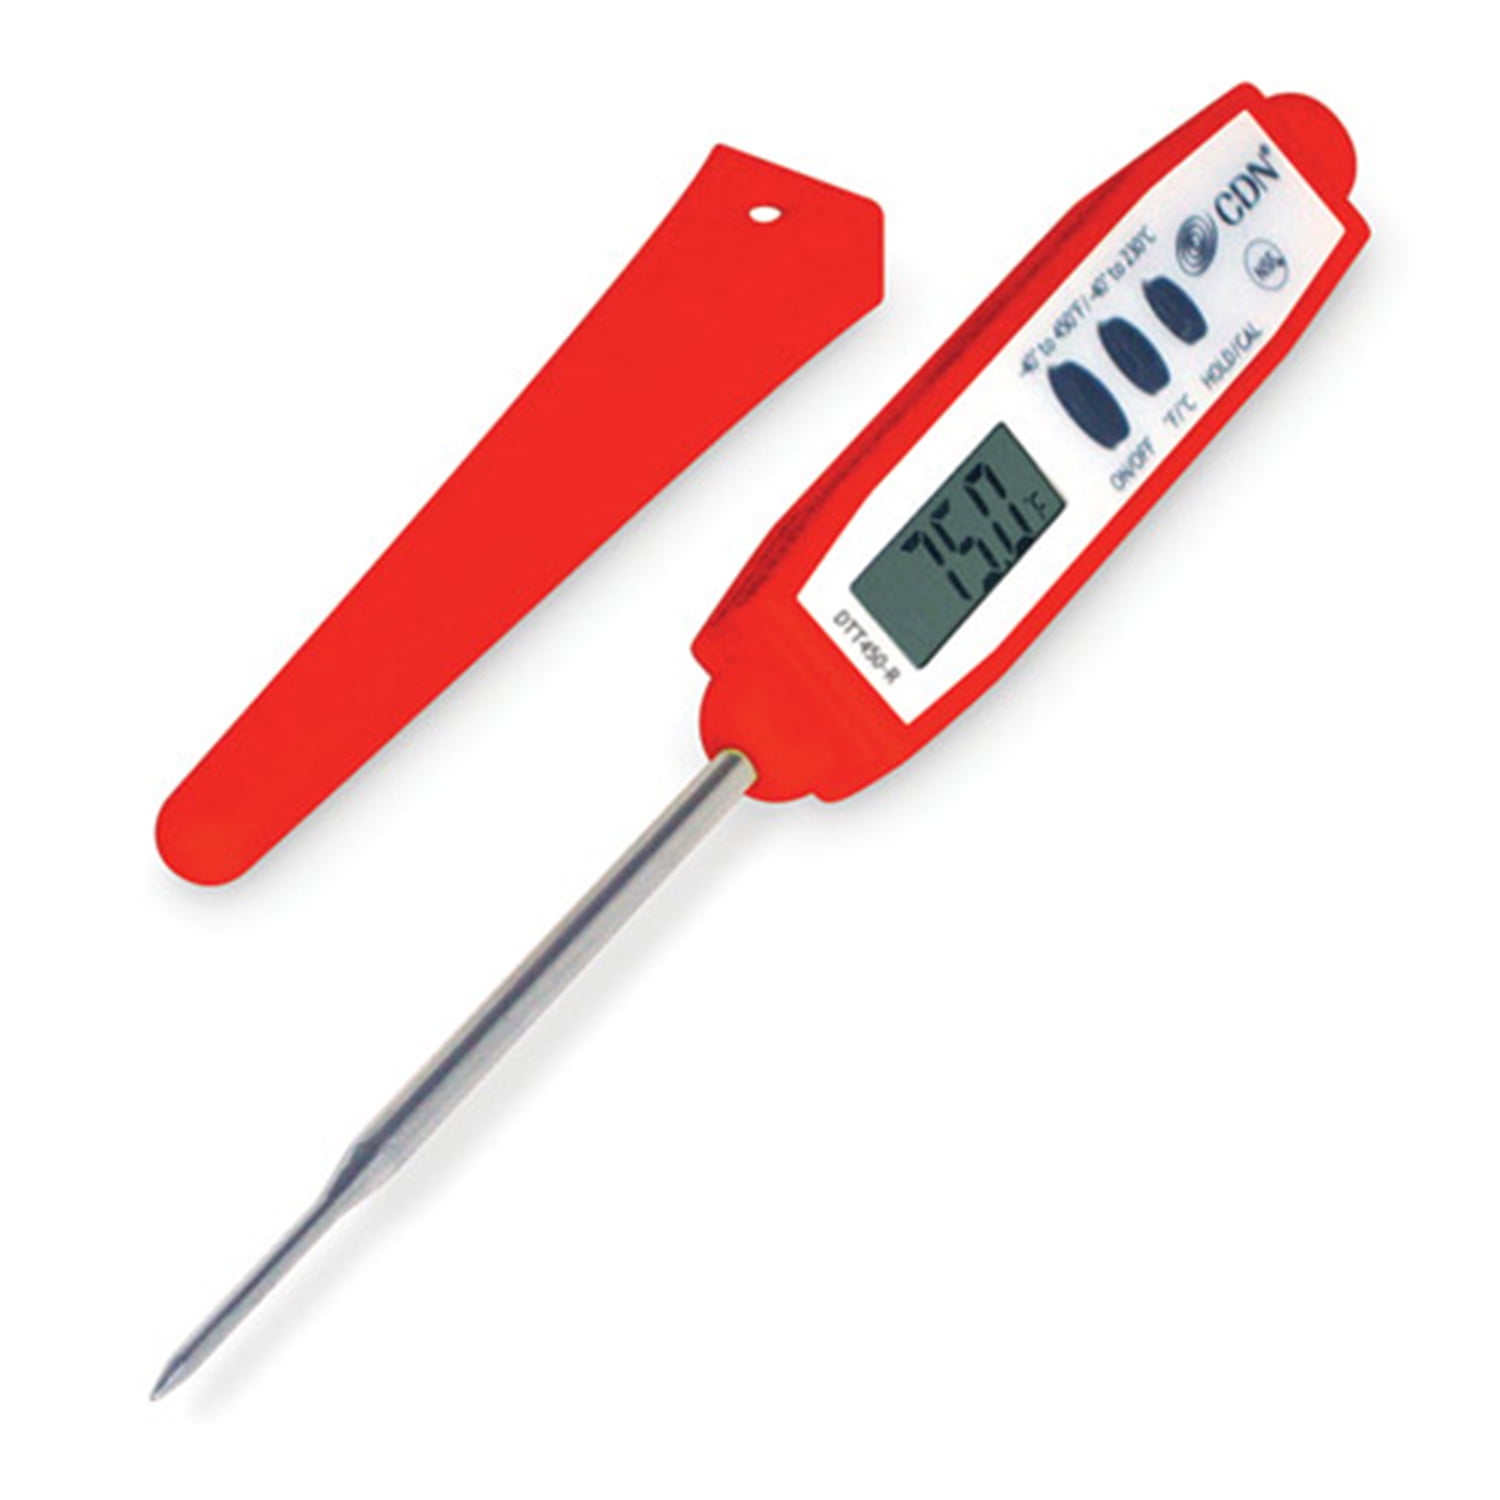 PROACCURATE WATERPROOF DIGITAL CANDY & DEEP FRY THERMOMETE